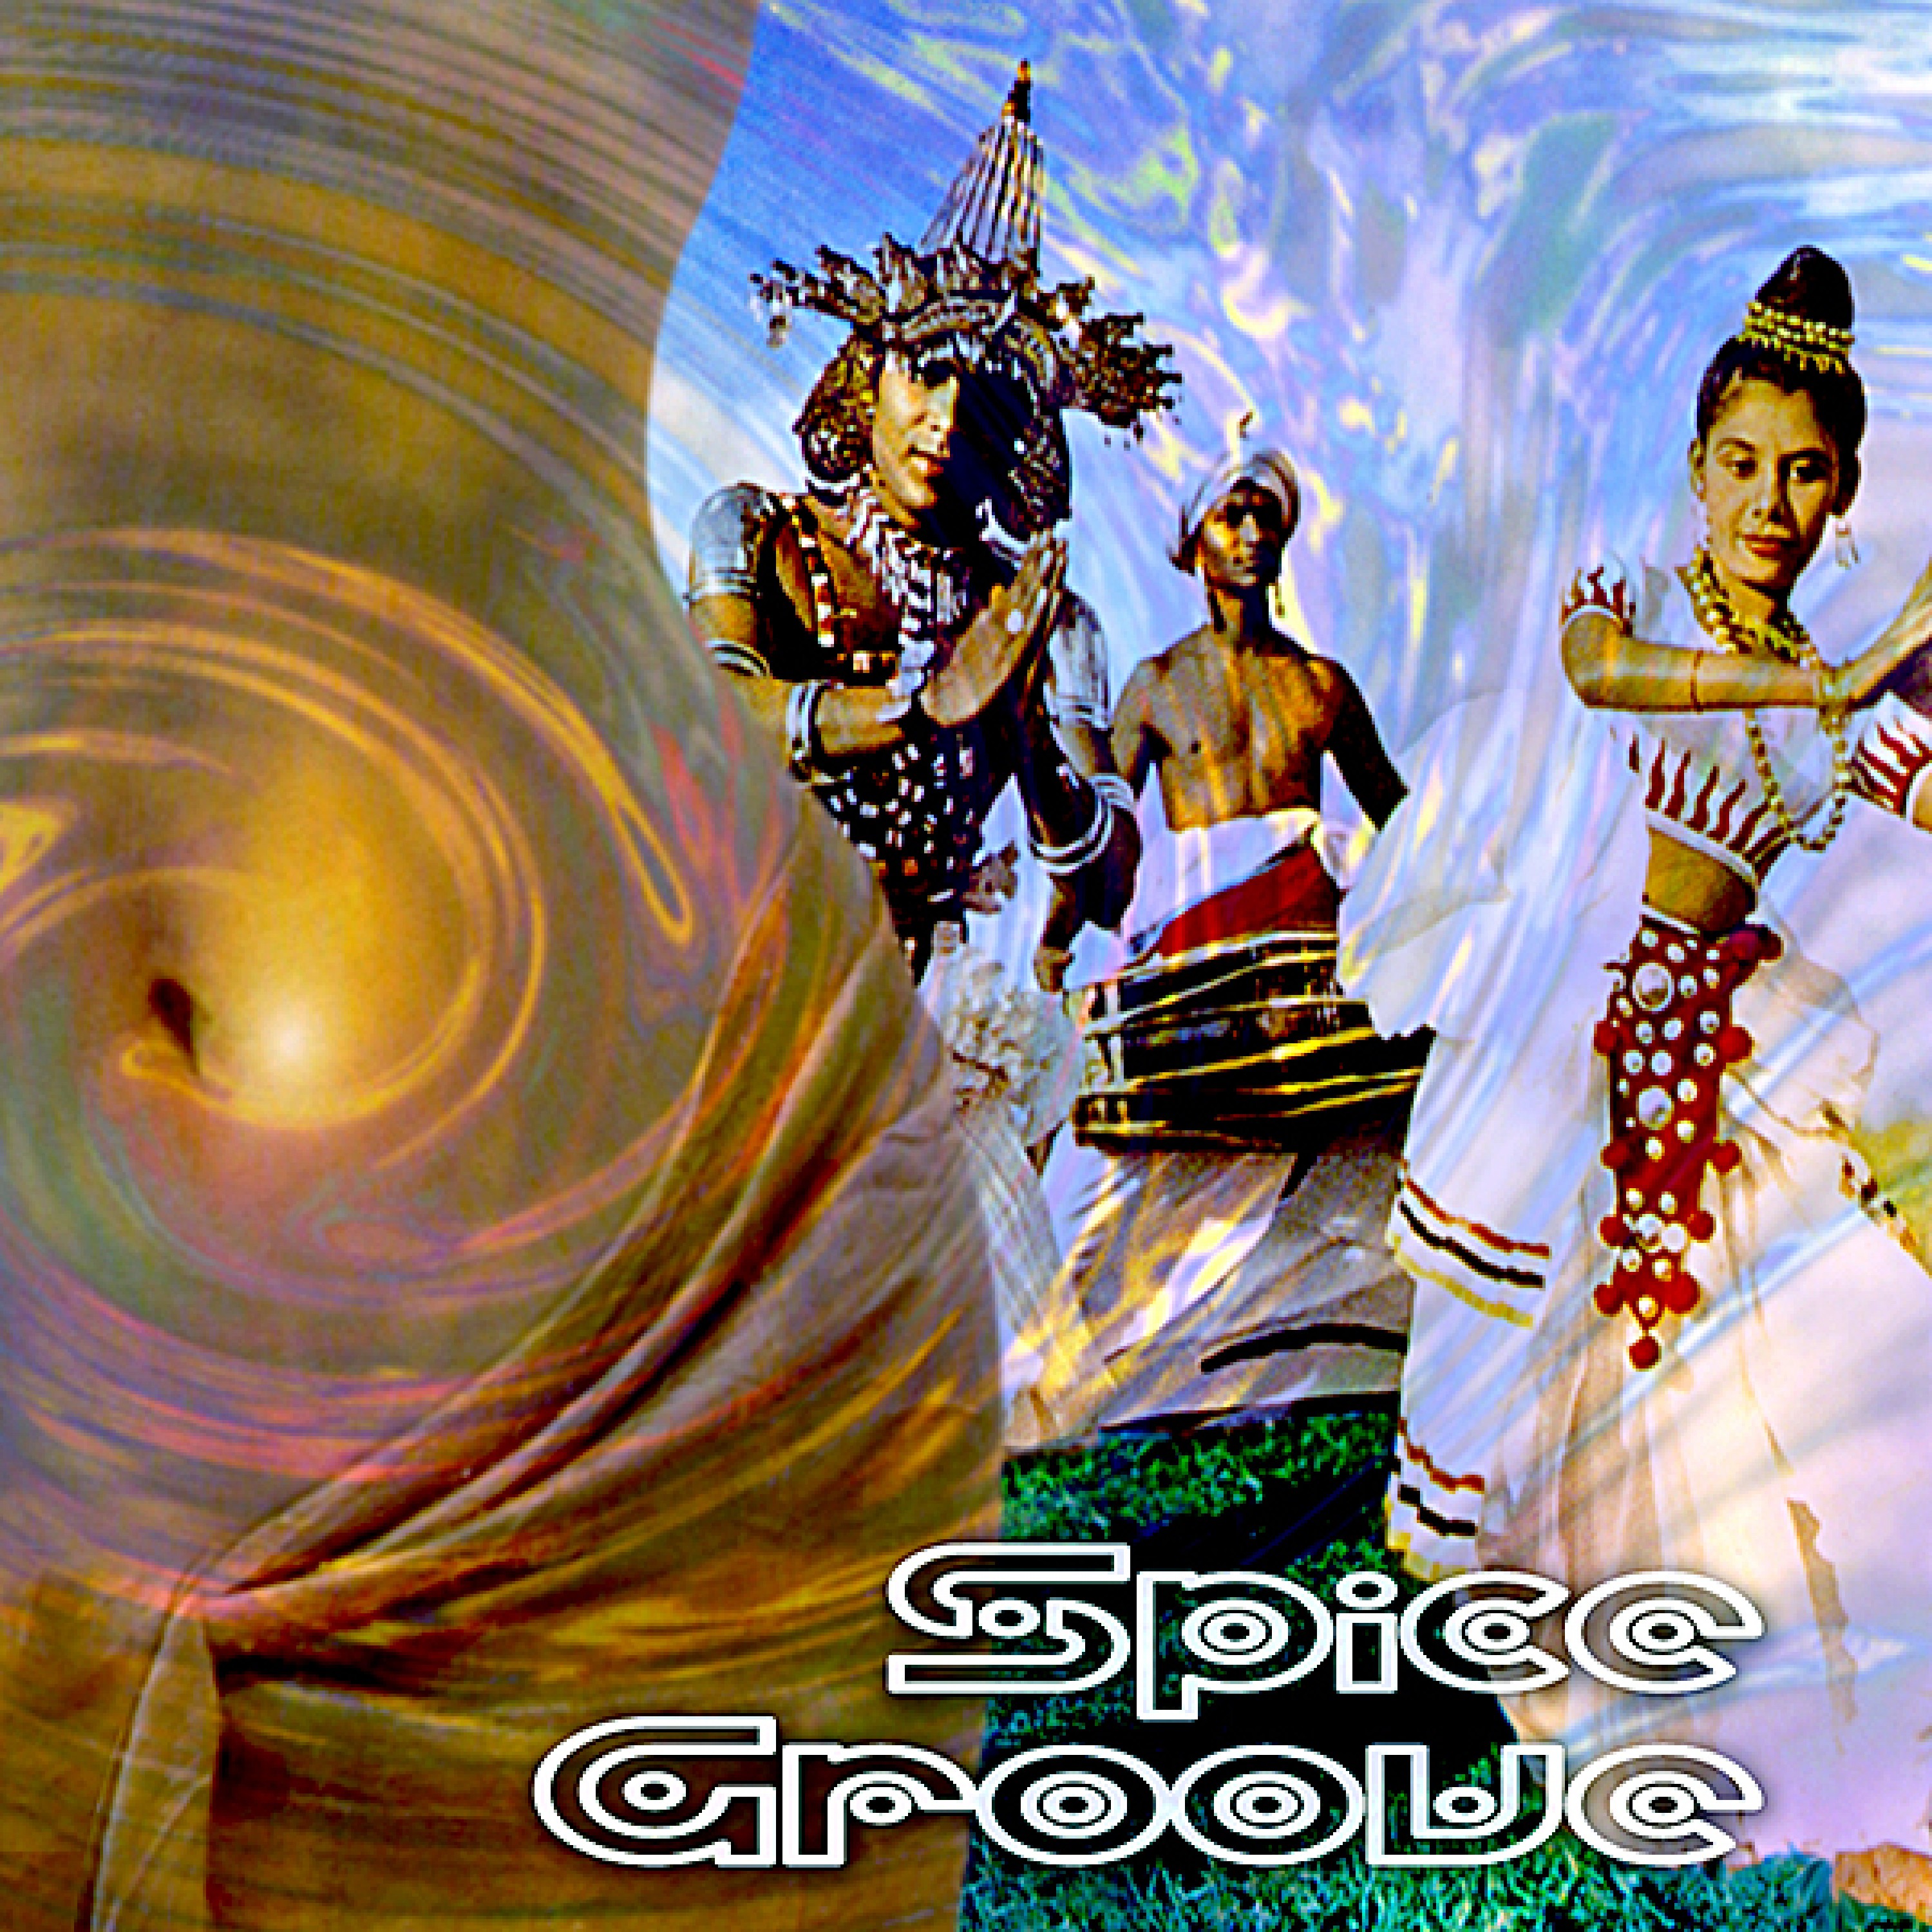 Spice Groove